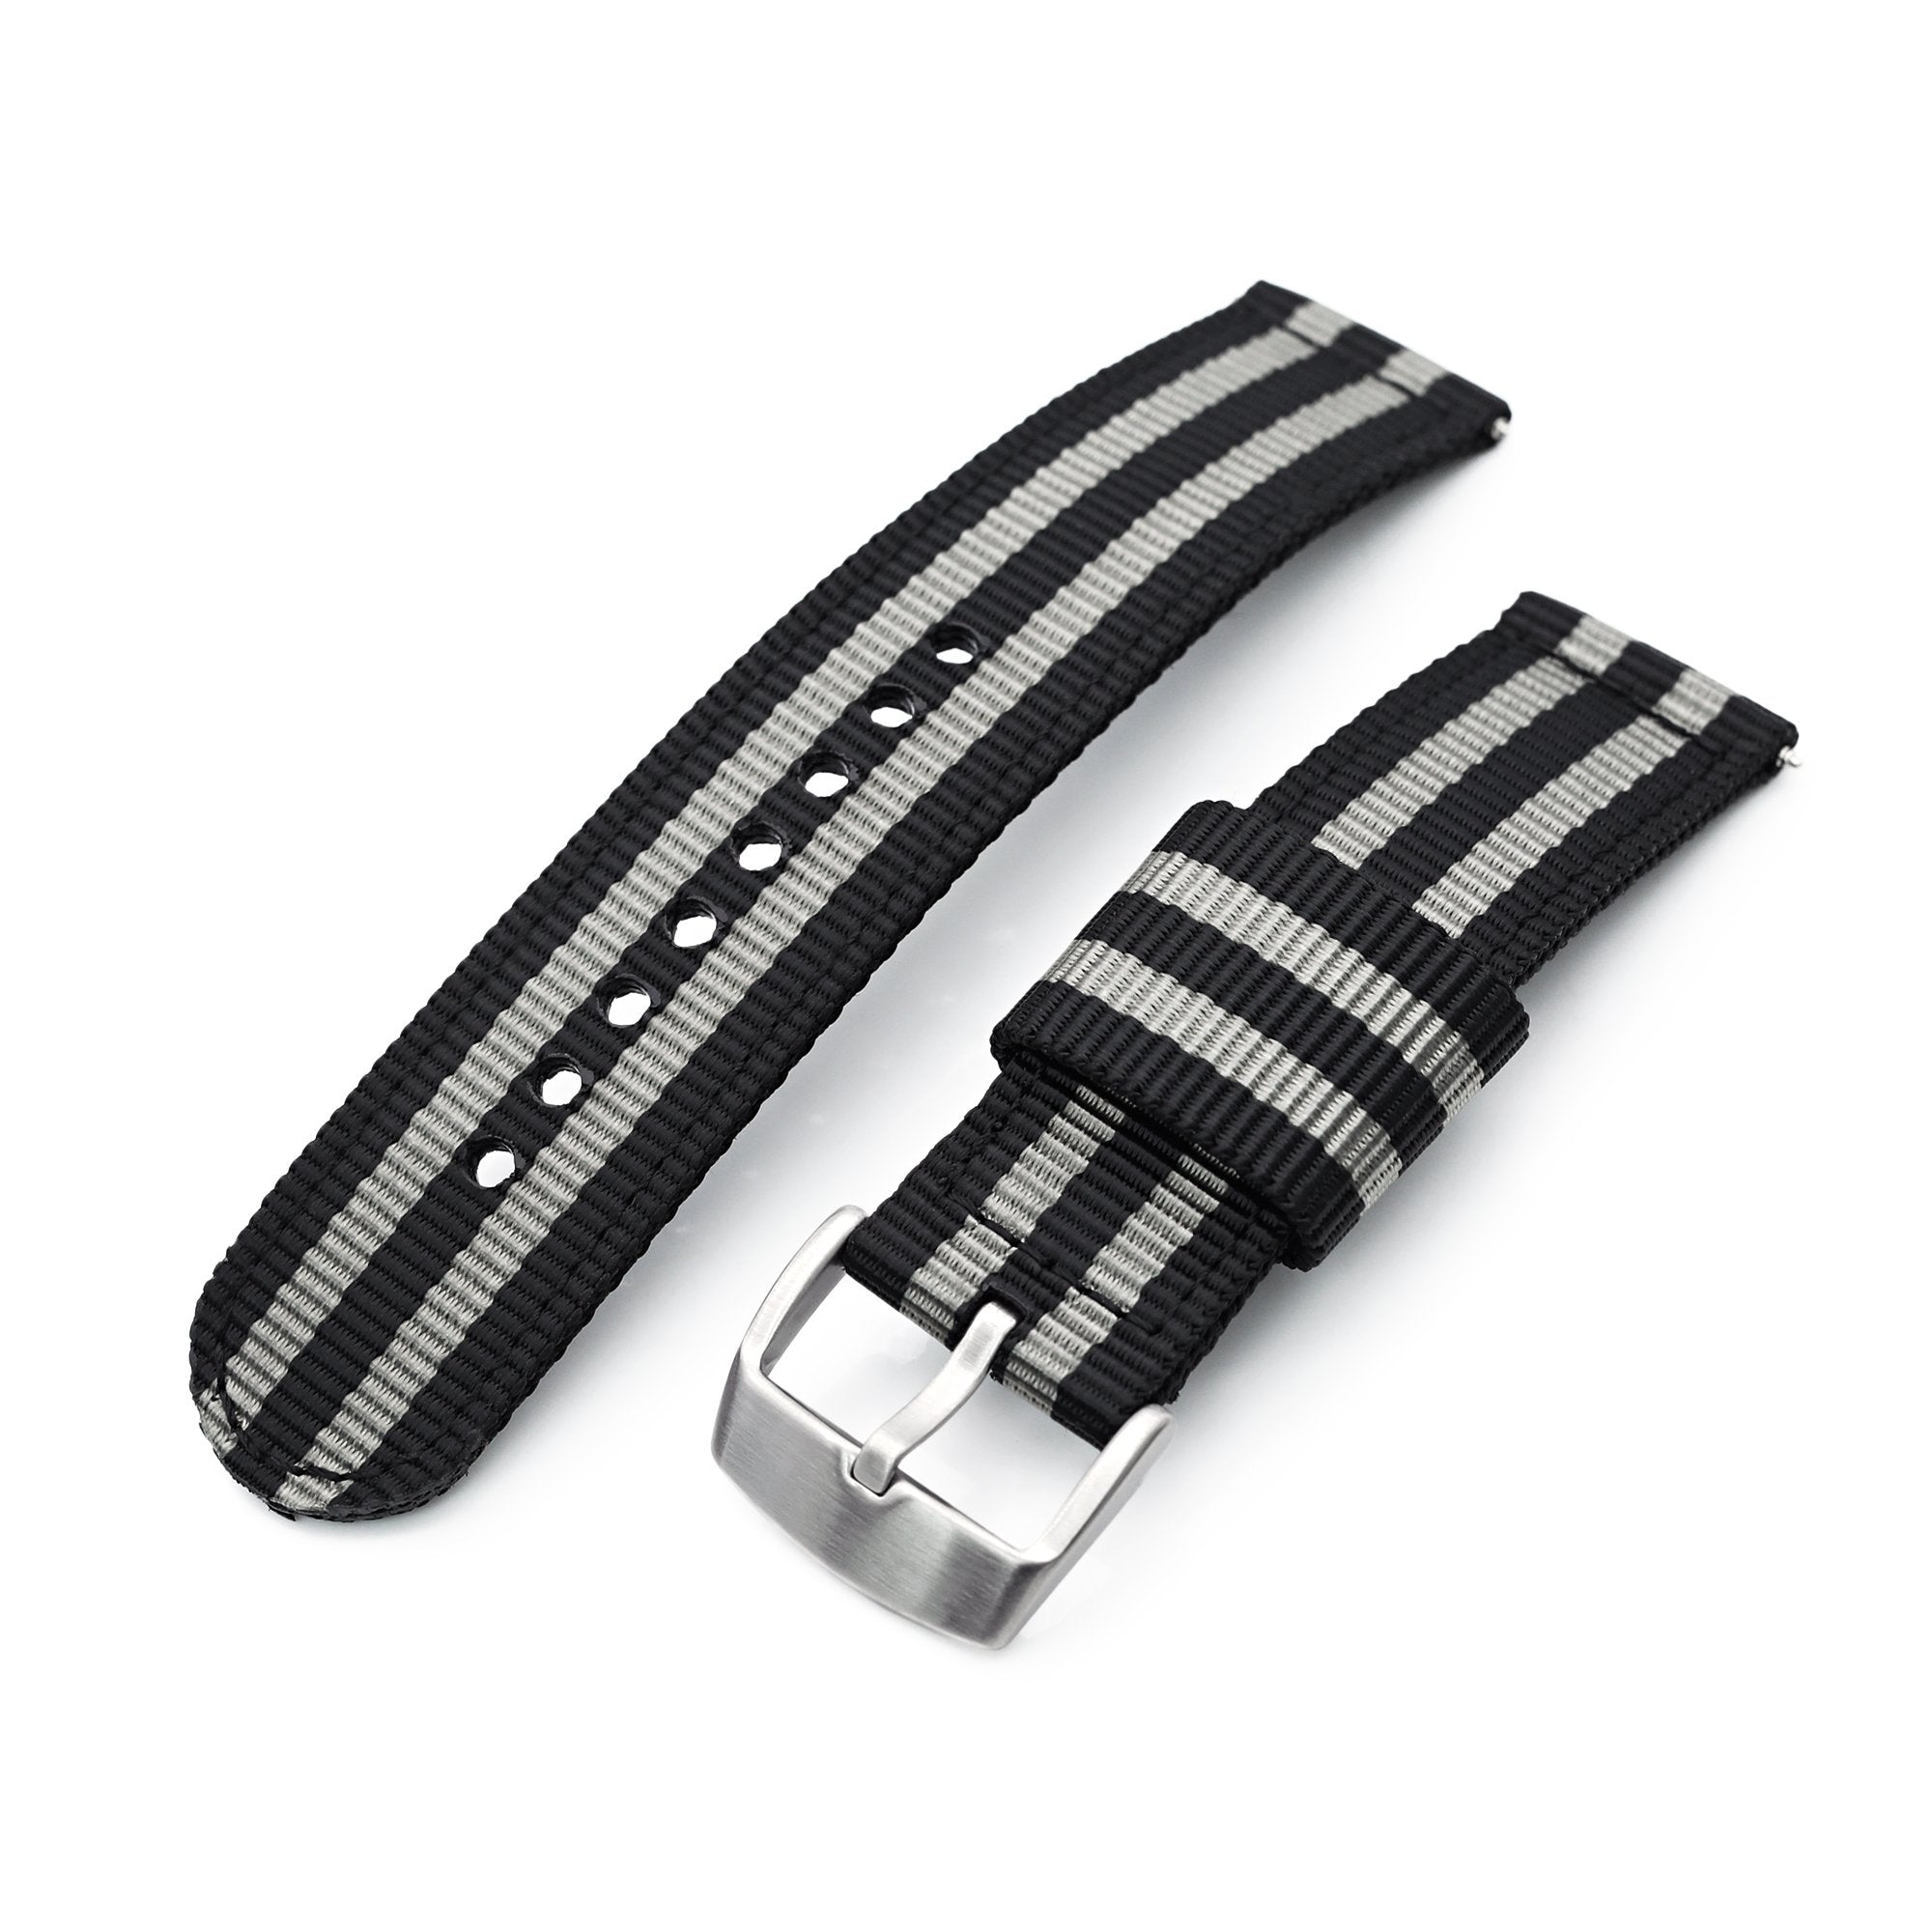 22mm 2-pcs Nylon Watch Band, Quick Release, Black & Grey Stripes, Brushed Buckle Strapcode Watch Bands